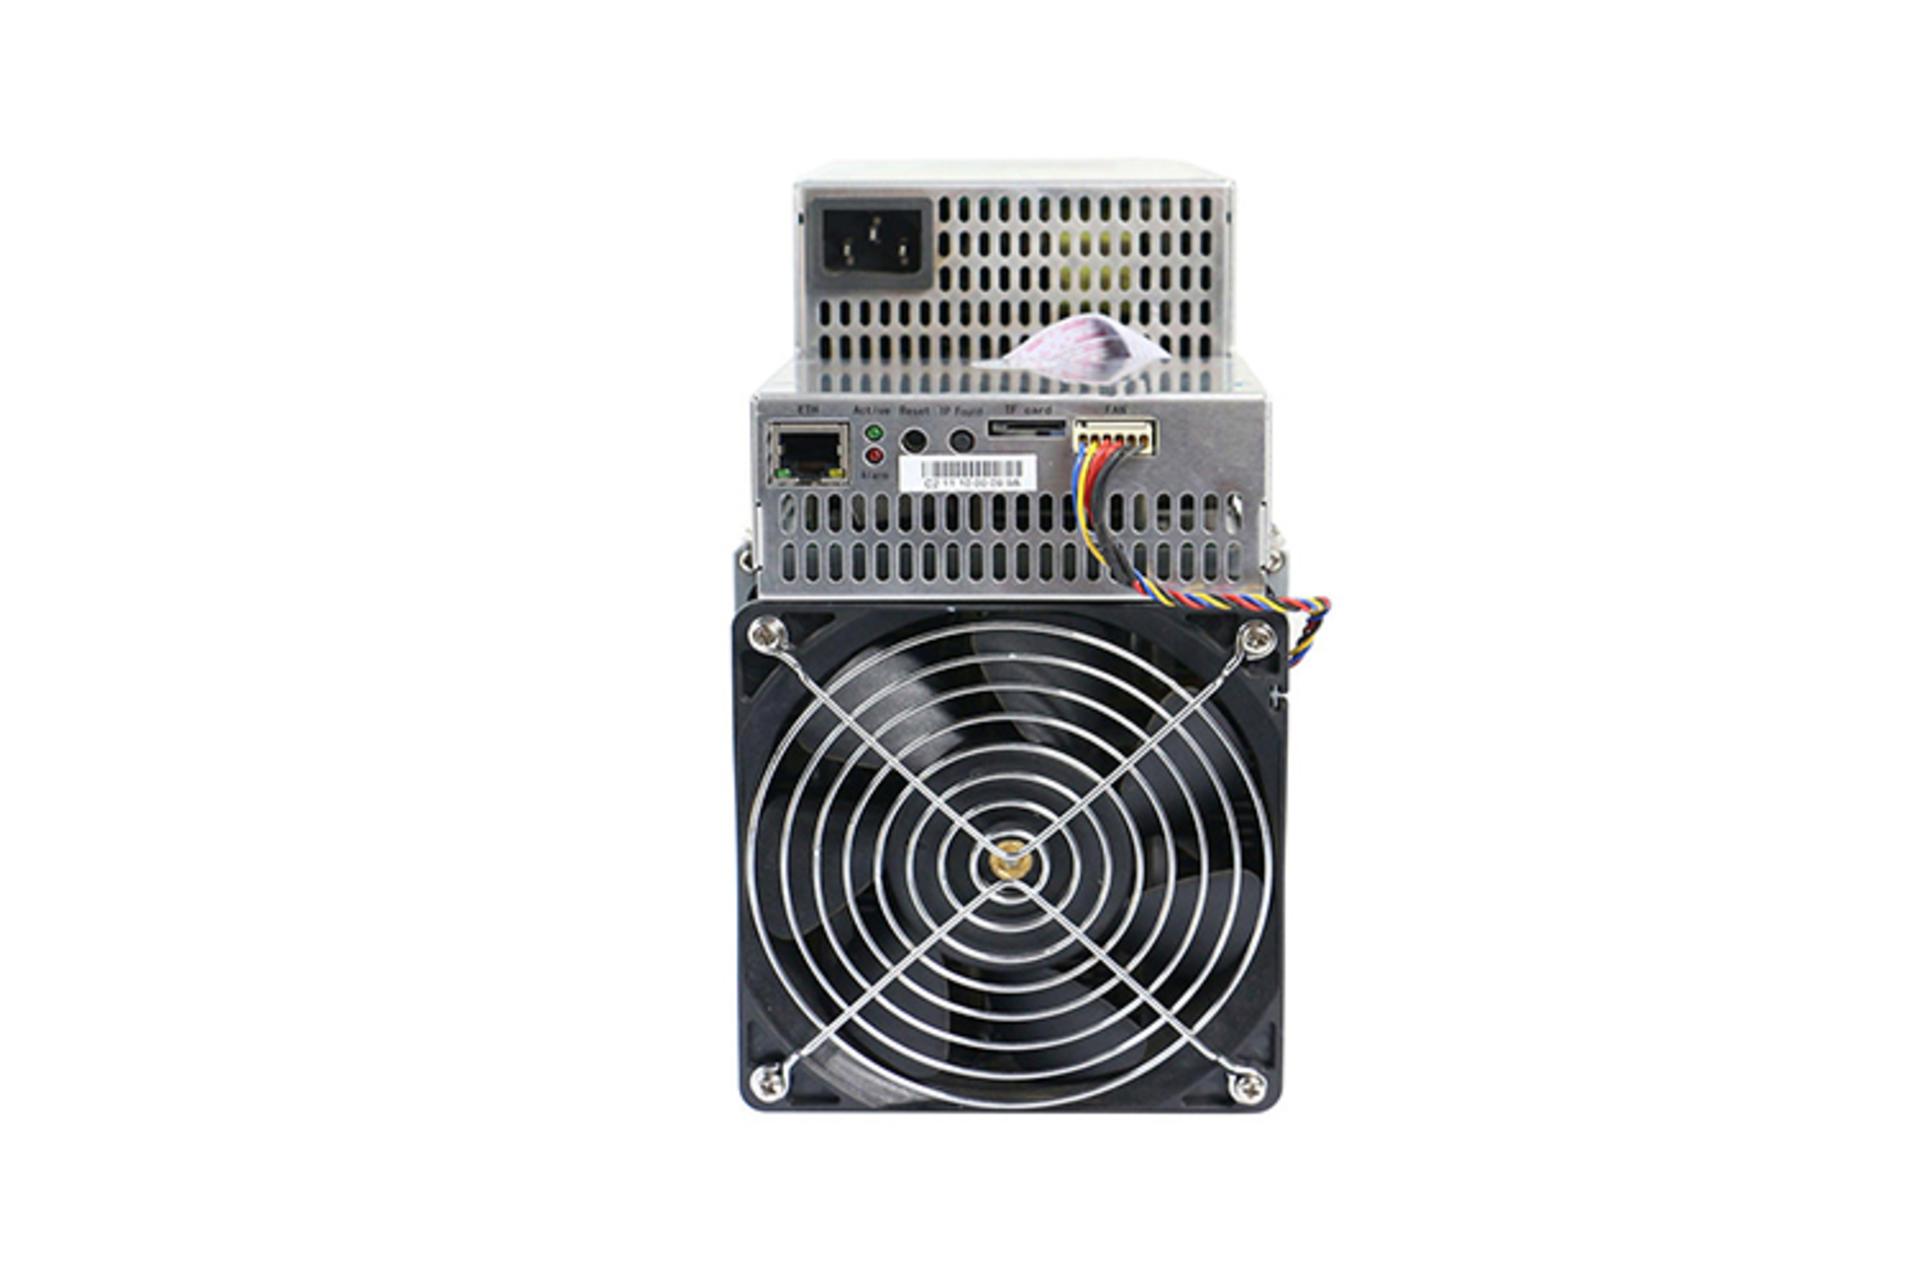 MicroBT Whatsminer M20S / ماینر MicroBT Whatsminer M20S